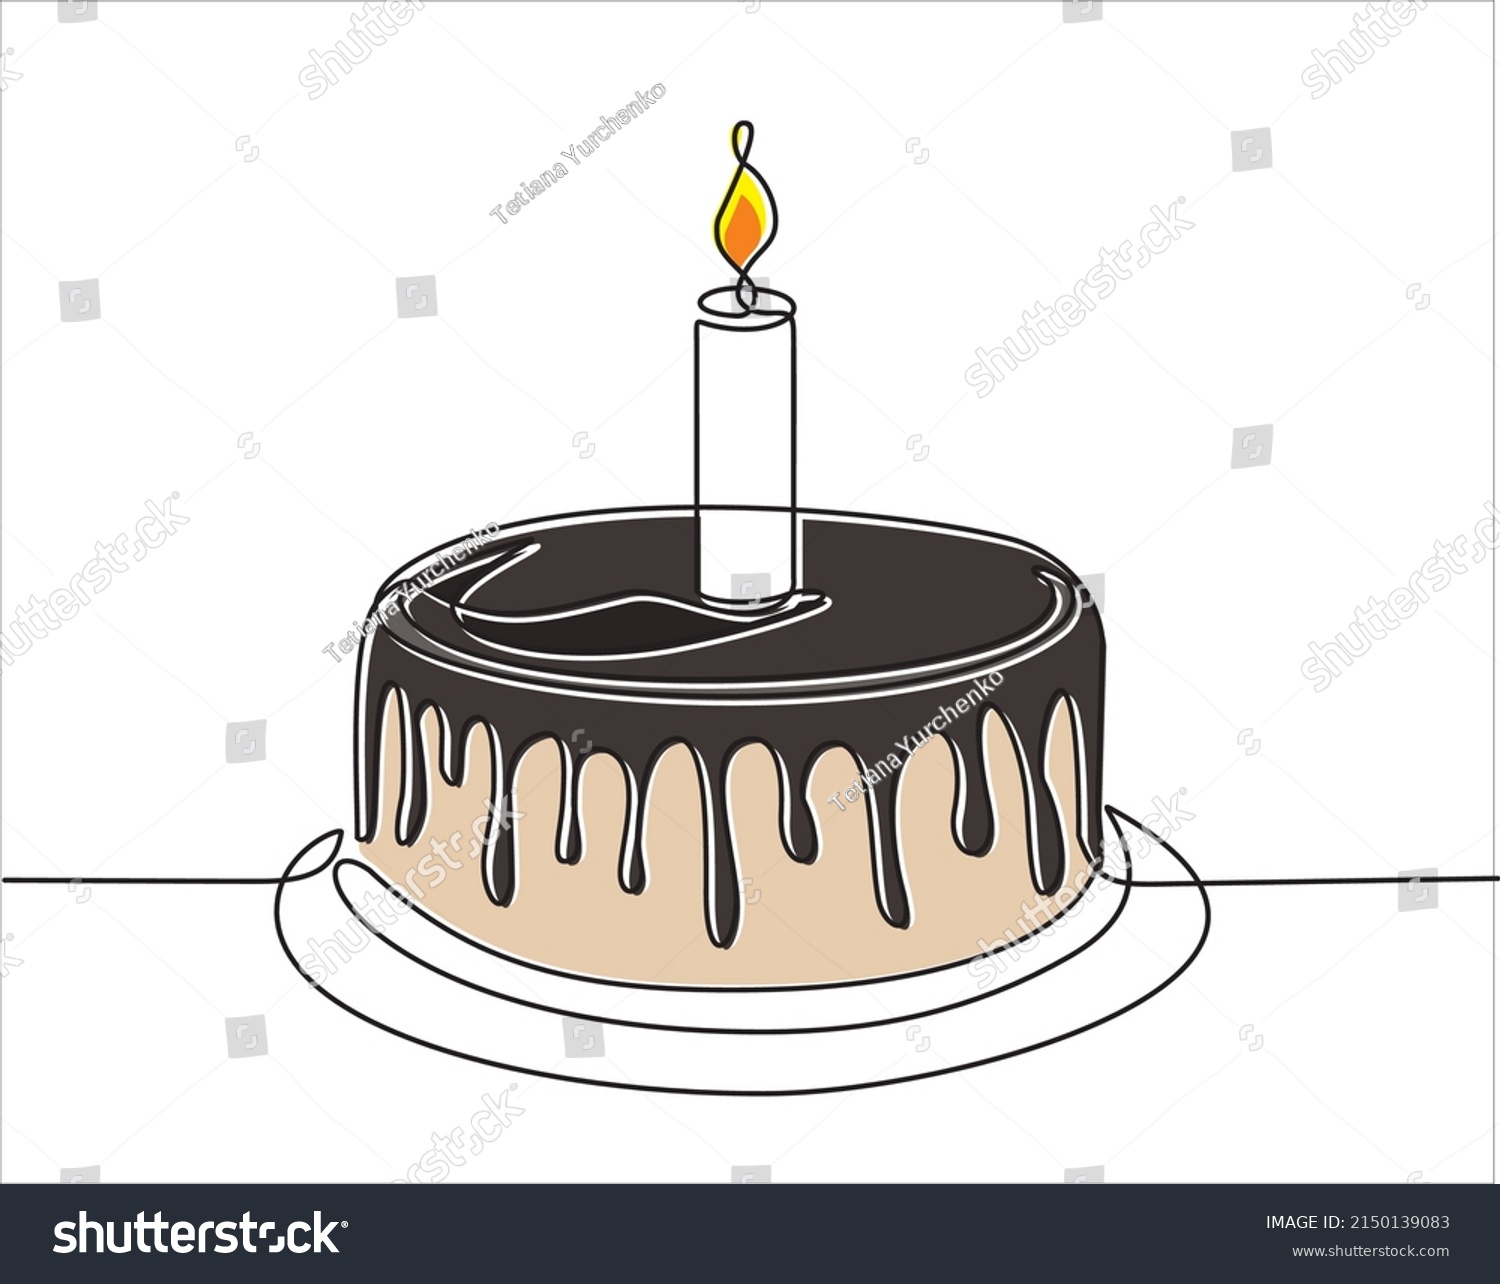 Continuous Line Drawing Birthday Cake Cake Stock Vector Royalty Free 2150139083 Shutterstock 0109